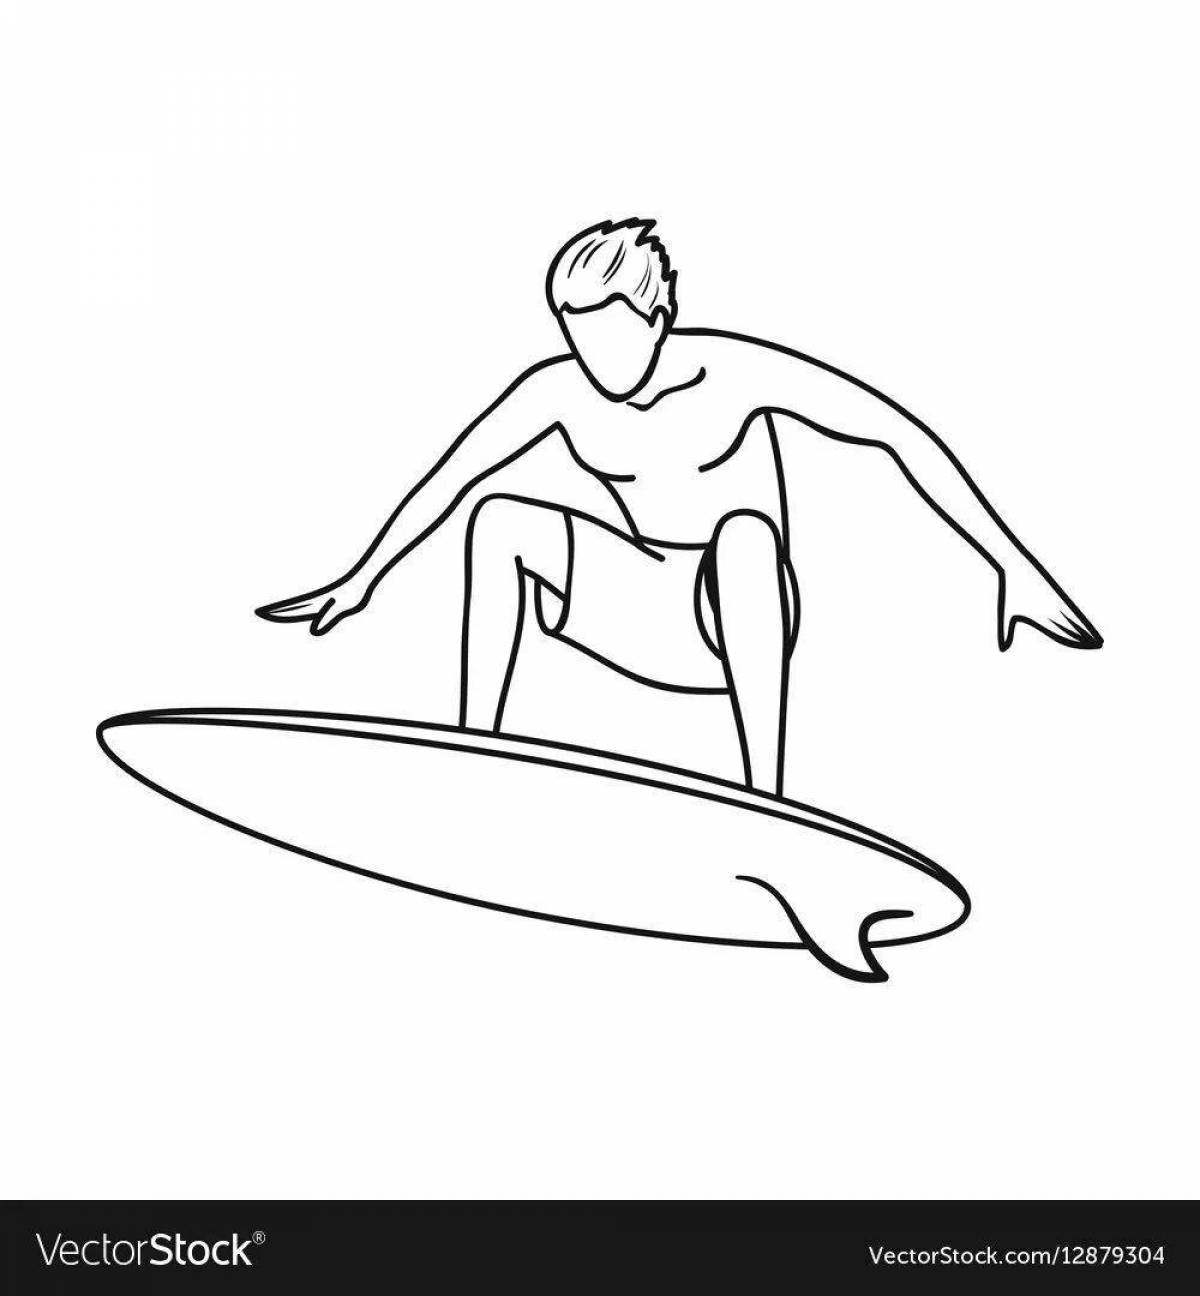 Coloring page joyful surfing